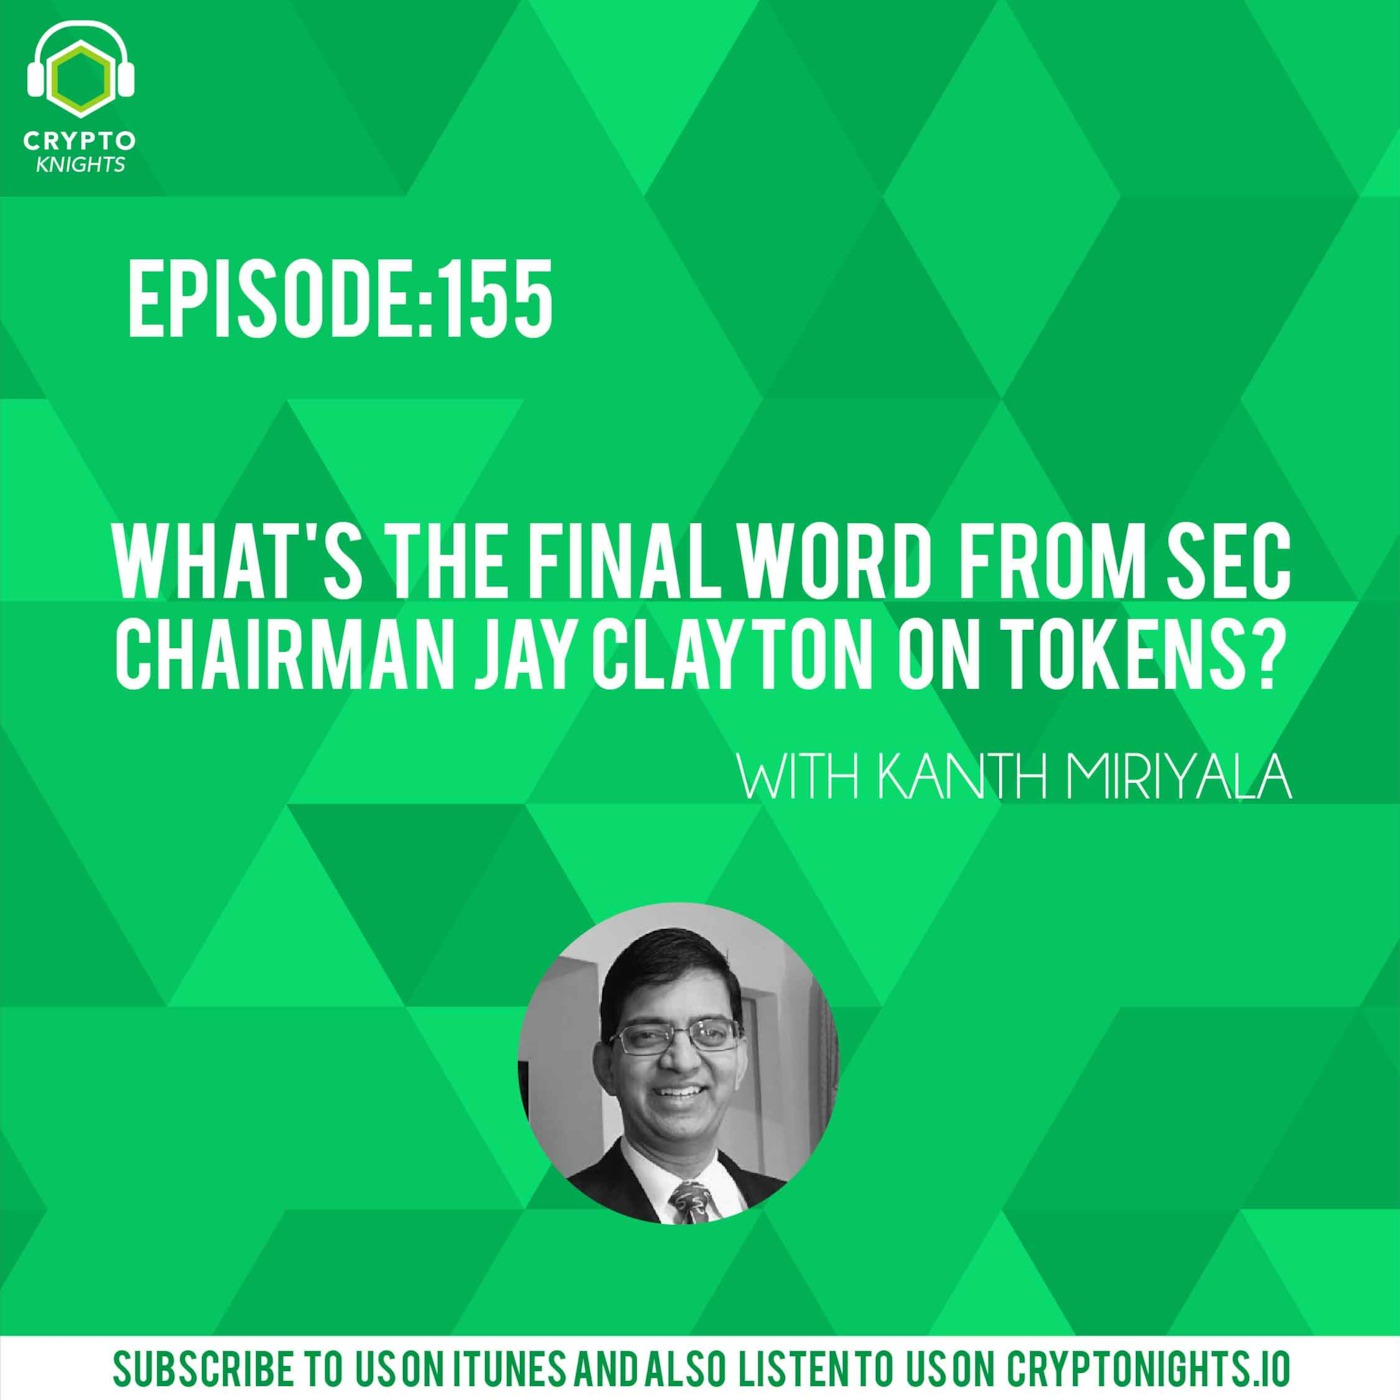 Episode 155 - What’s the Final Word from SEC chairman Jay Clayton on Tokens?